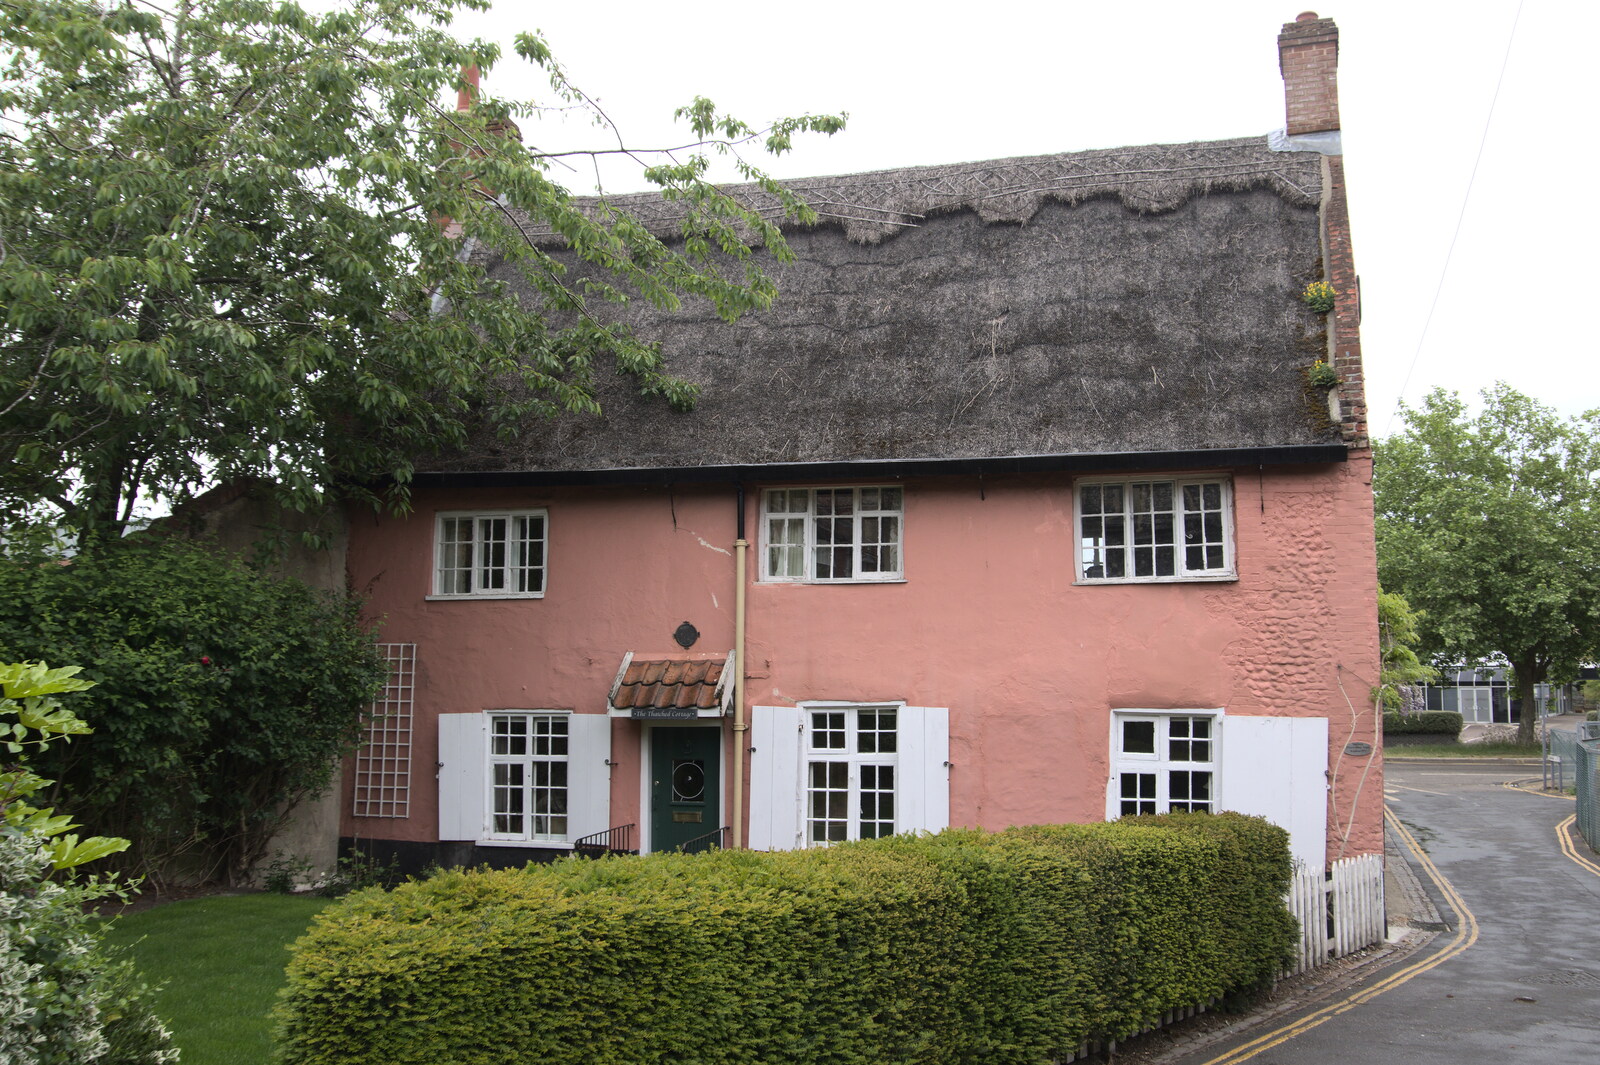 Country house on St, Margaret's Street from Discovering the Hidden City: Norwich, Norfolk - 23rd May 2022